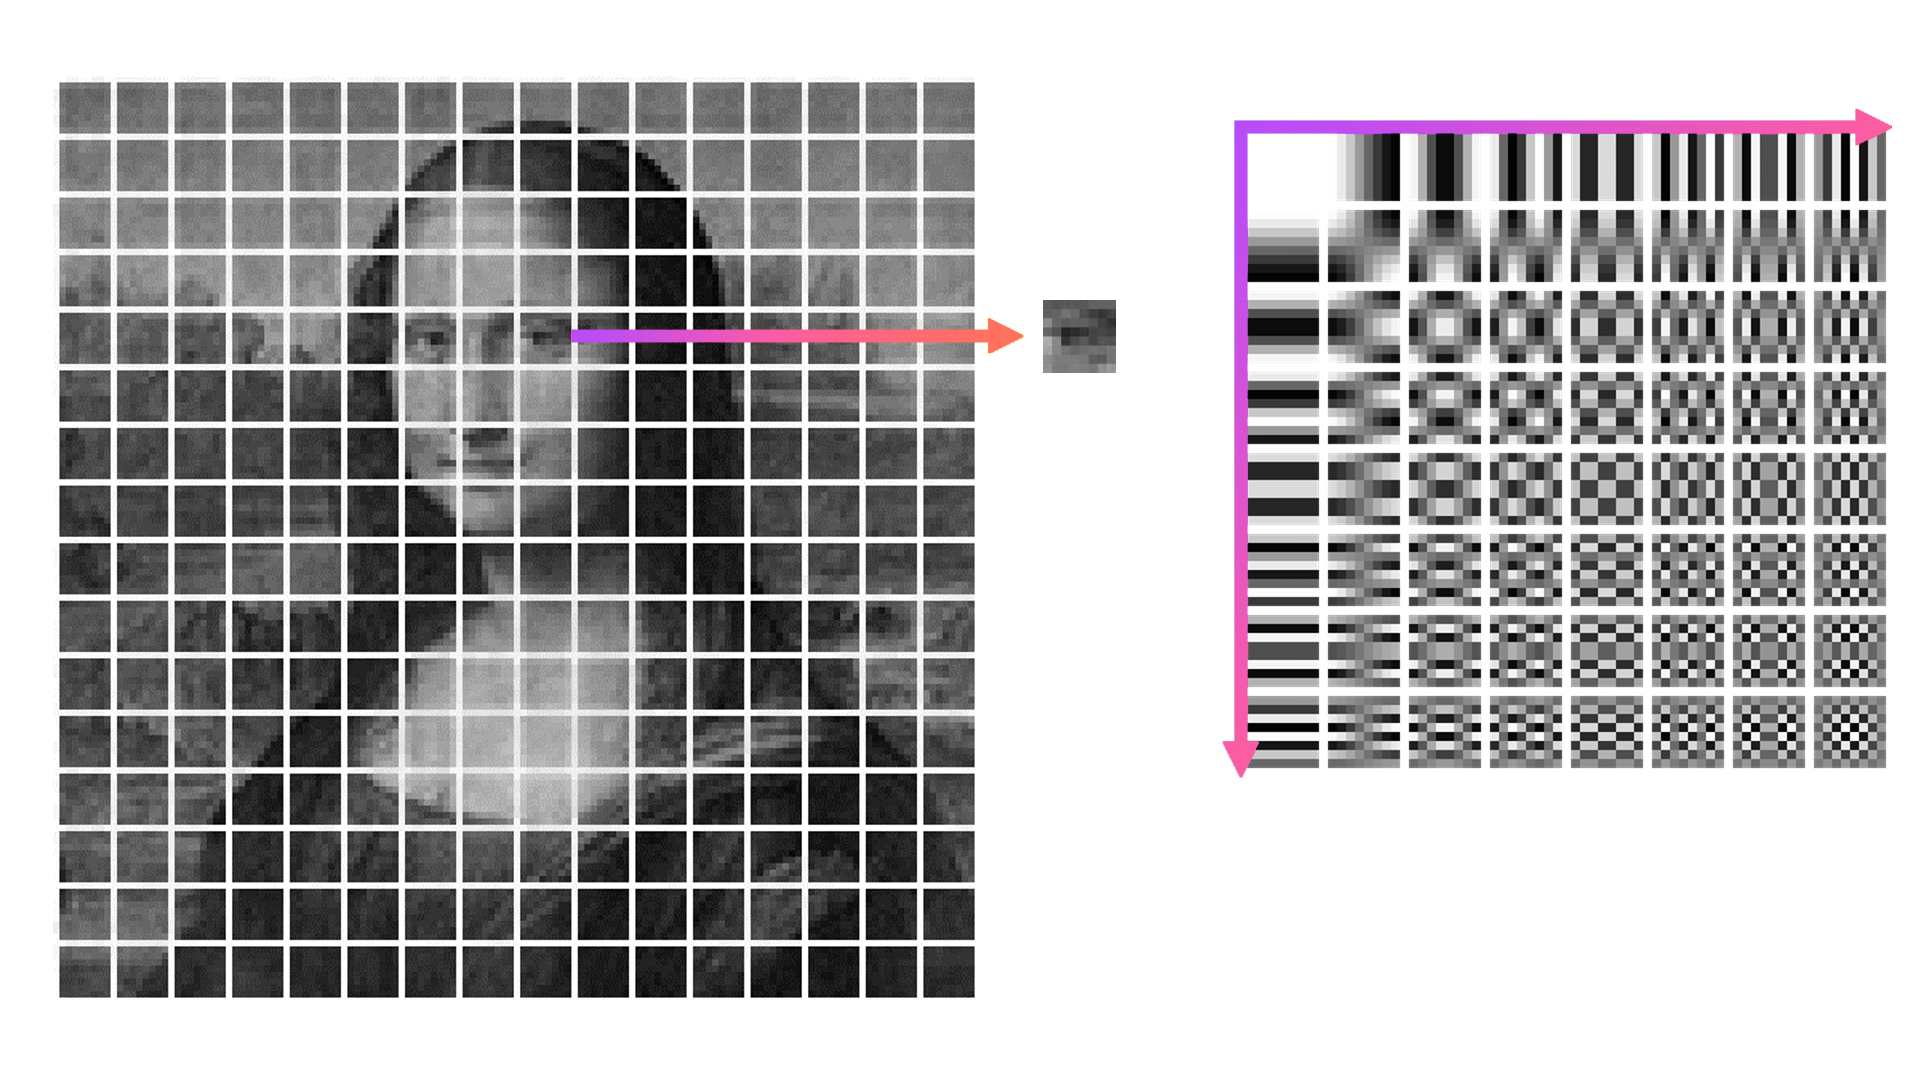 Comparing image block to 64 frequency patterns